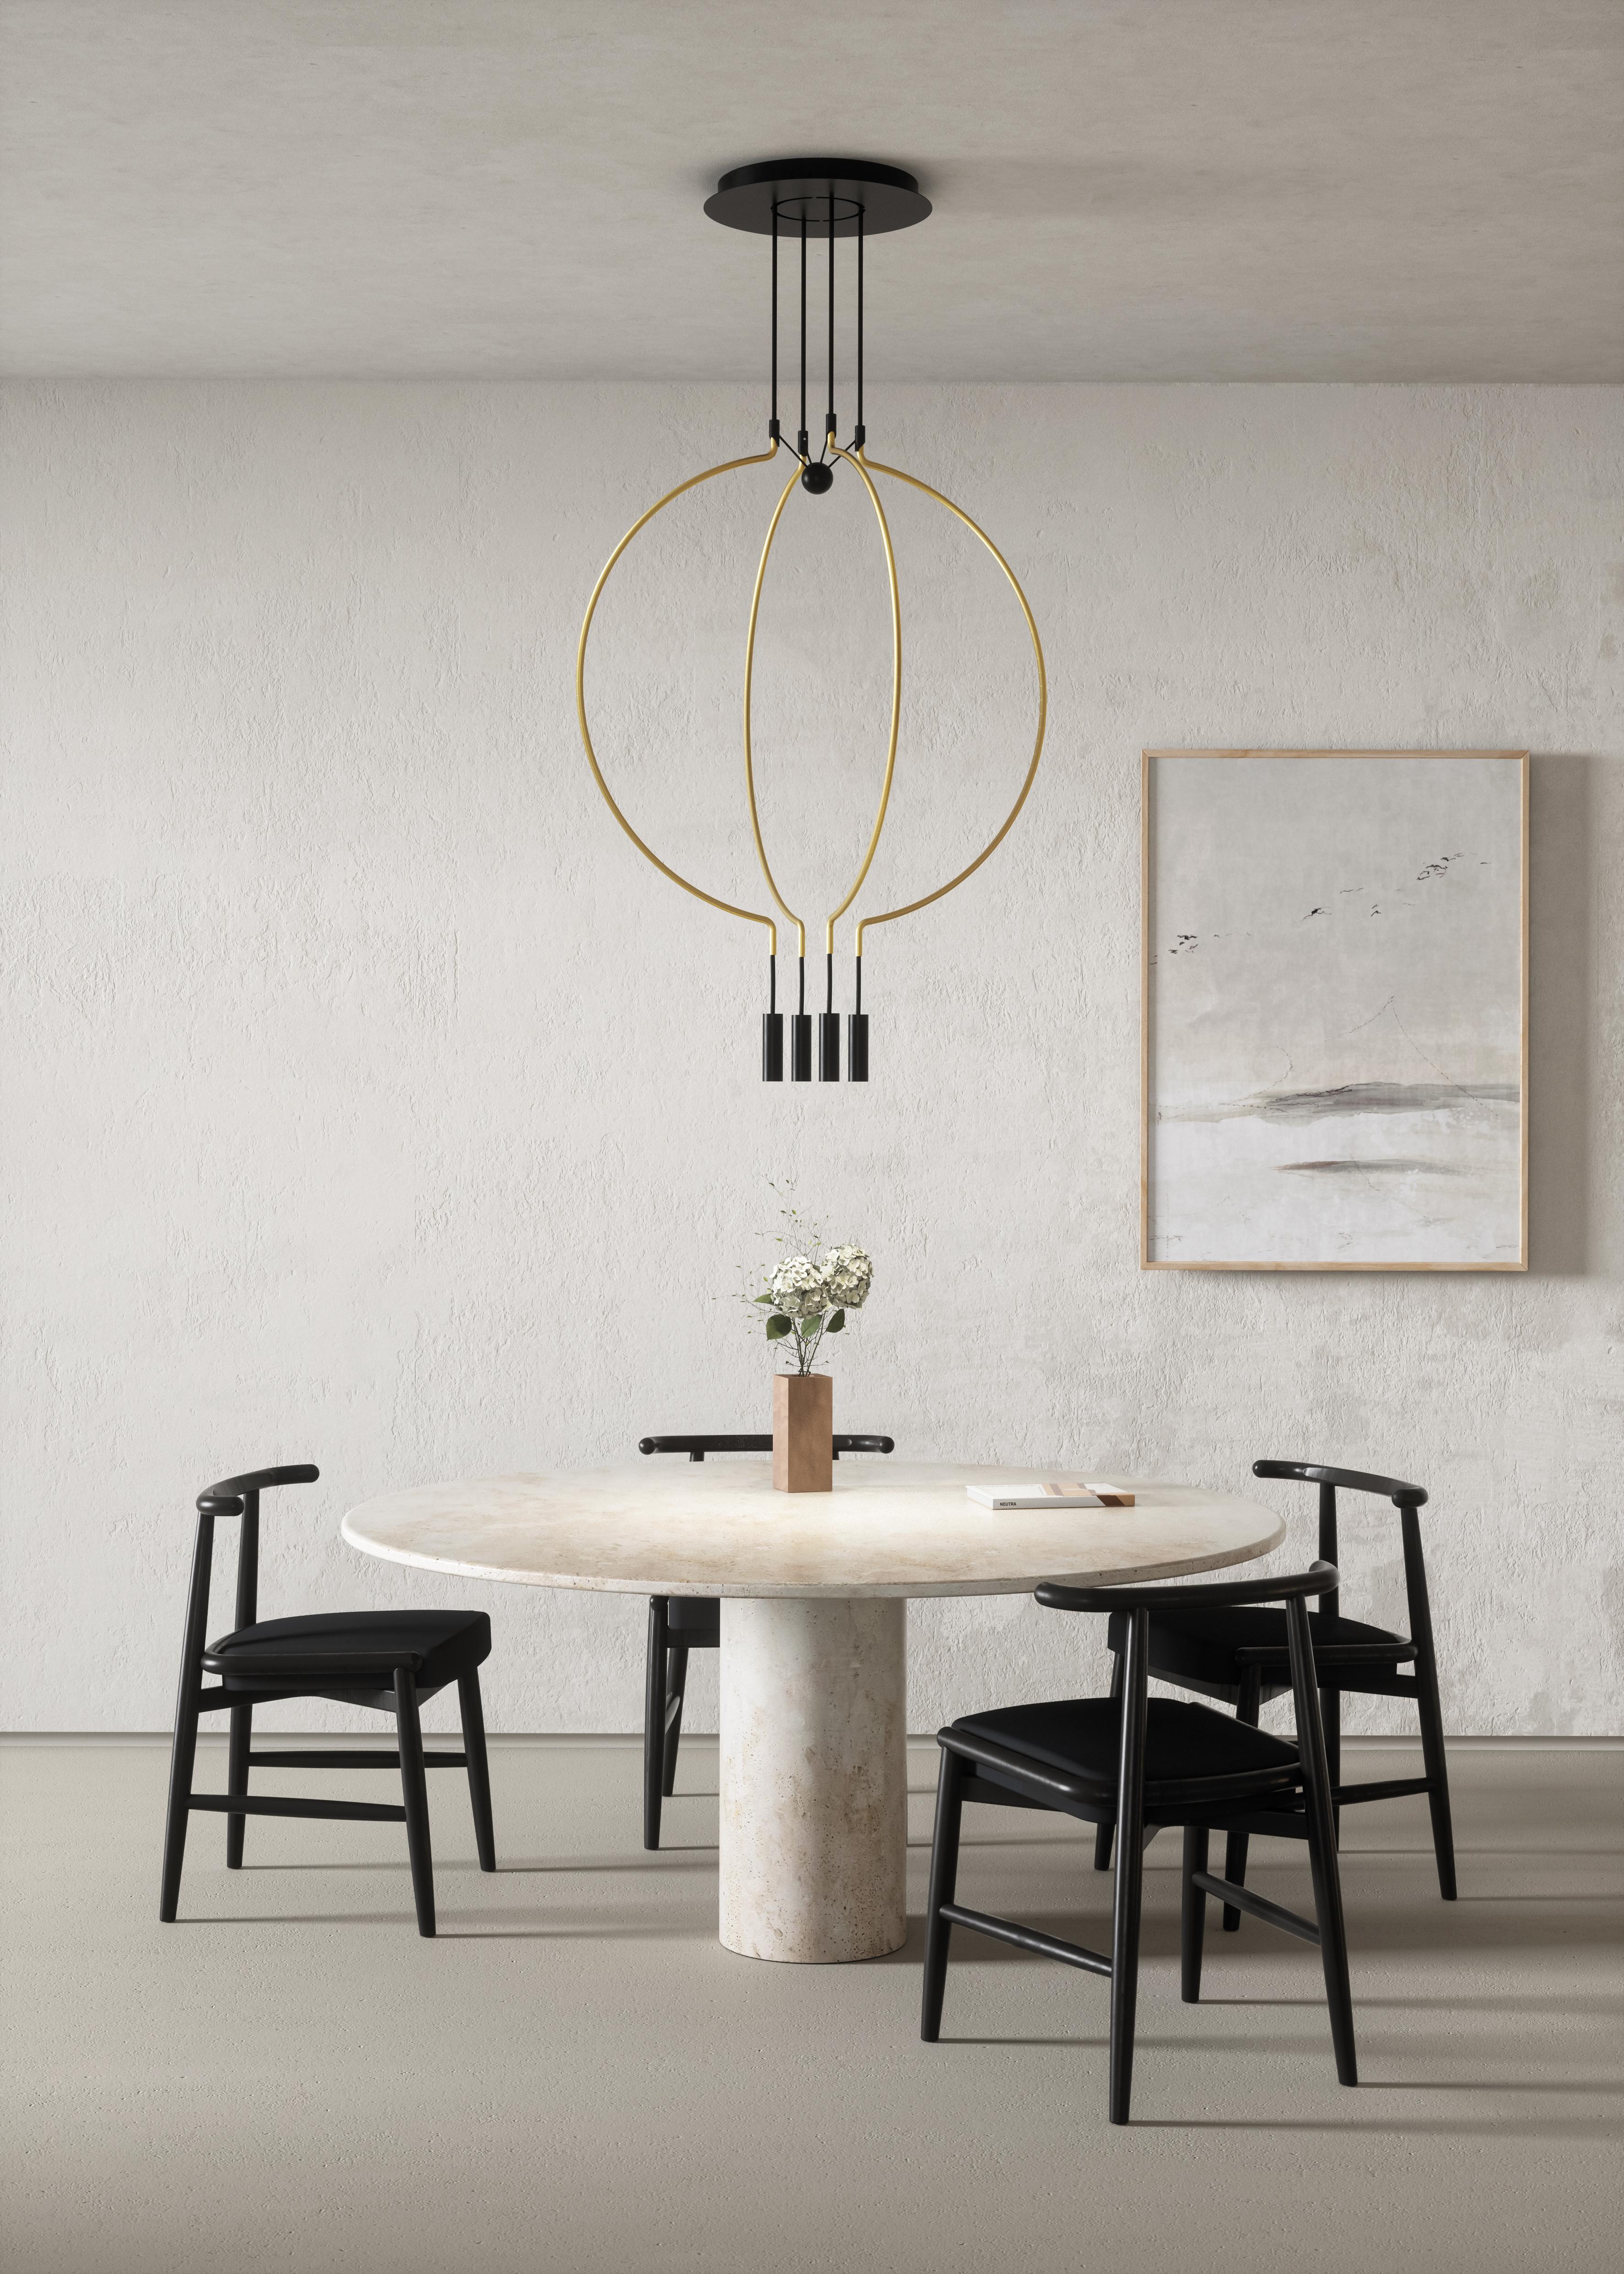 Axolight Liaison Model M8 Pendant Lamp in Gold/Black by Sara Moroni

Modular lightness and elegance. Liaison tells about the perfect balance of three geometric archetypes: sphere, circle and cylinder compose a system that includes the single pendant